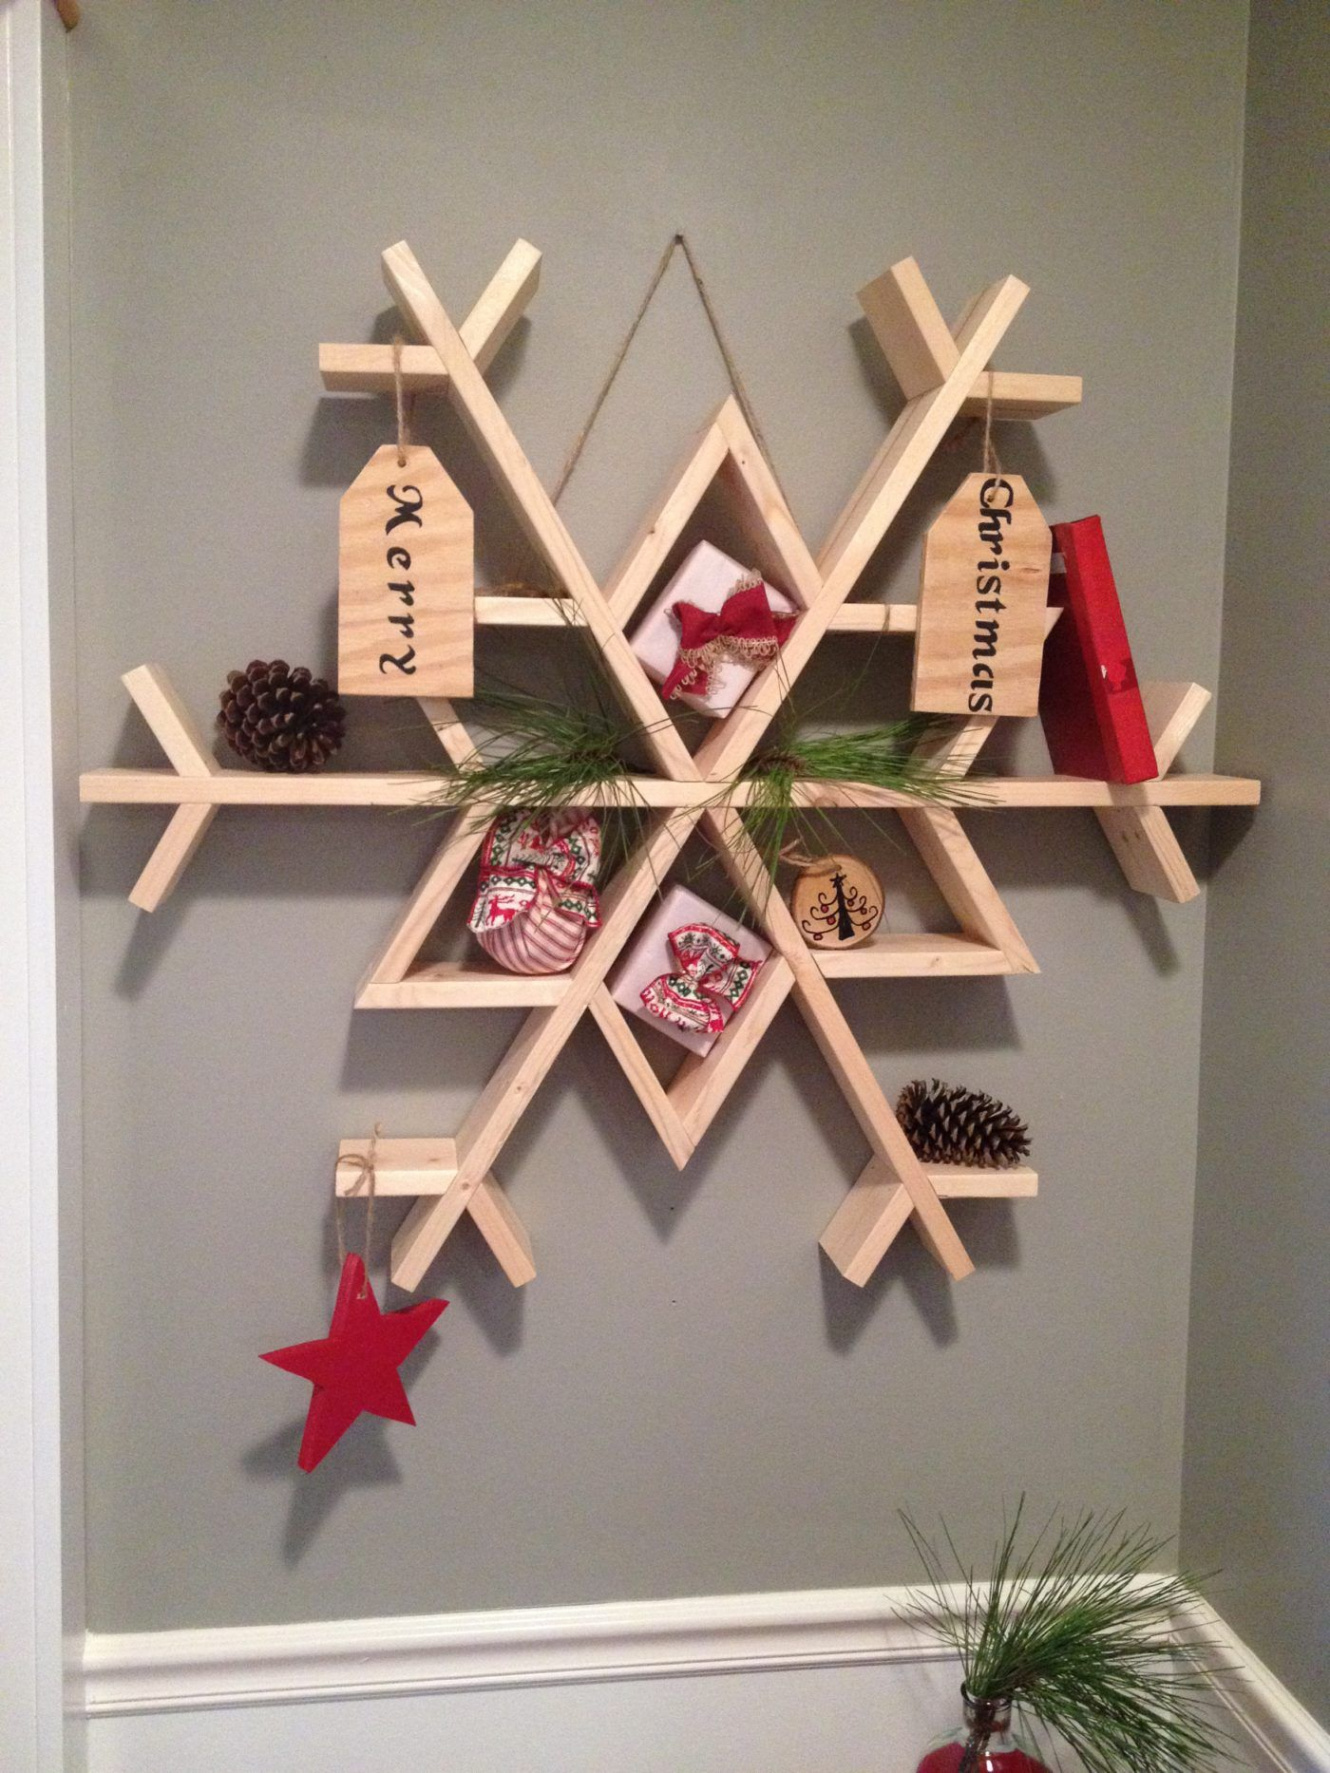 Best Christmas Wood Crafts - DIY Holiday Wood Projects and Ideas